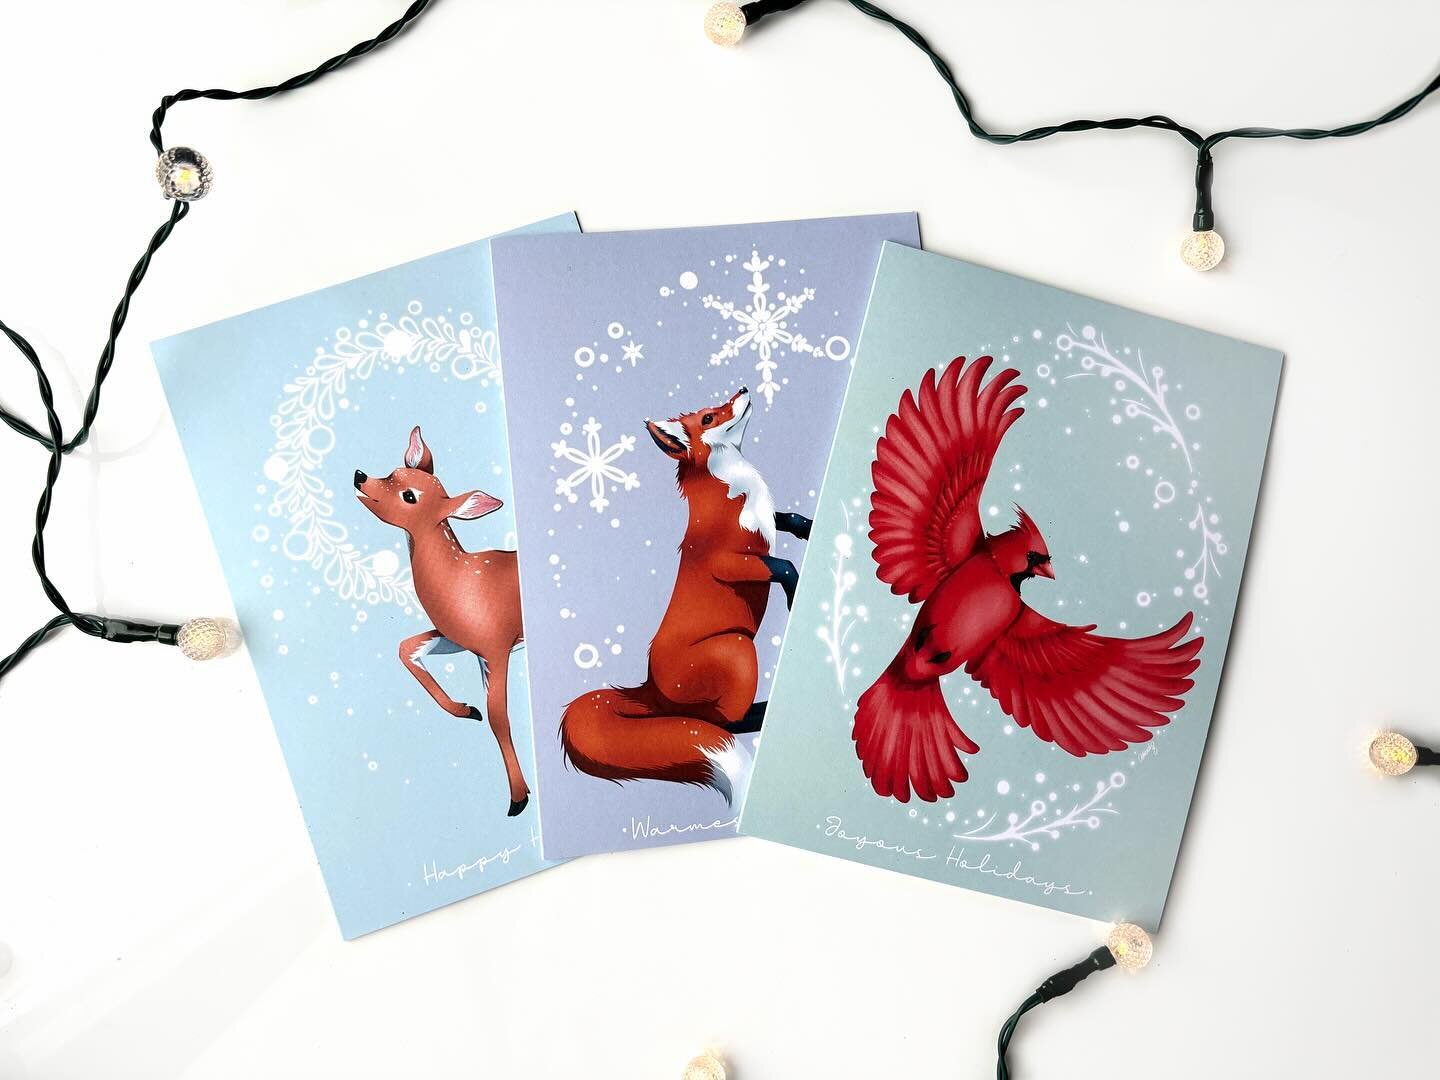 Holiday cards are here! Link in bio! Hope everyone is staying safe and warm 🤍❄️
&bull;
&bull;
&bull;
#holidaycards #independentartist #foxesandbirdsanddeerohmy #holidayart #christmasart #chriatsmascards